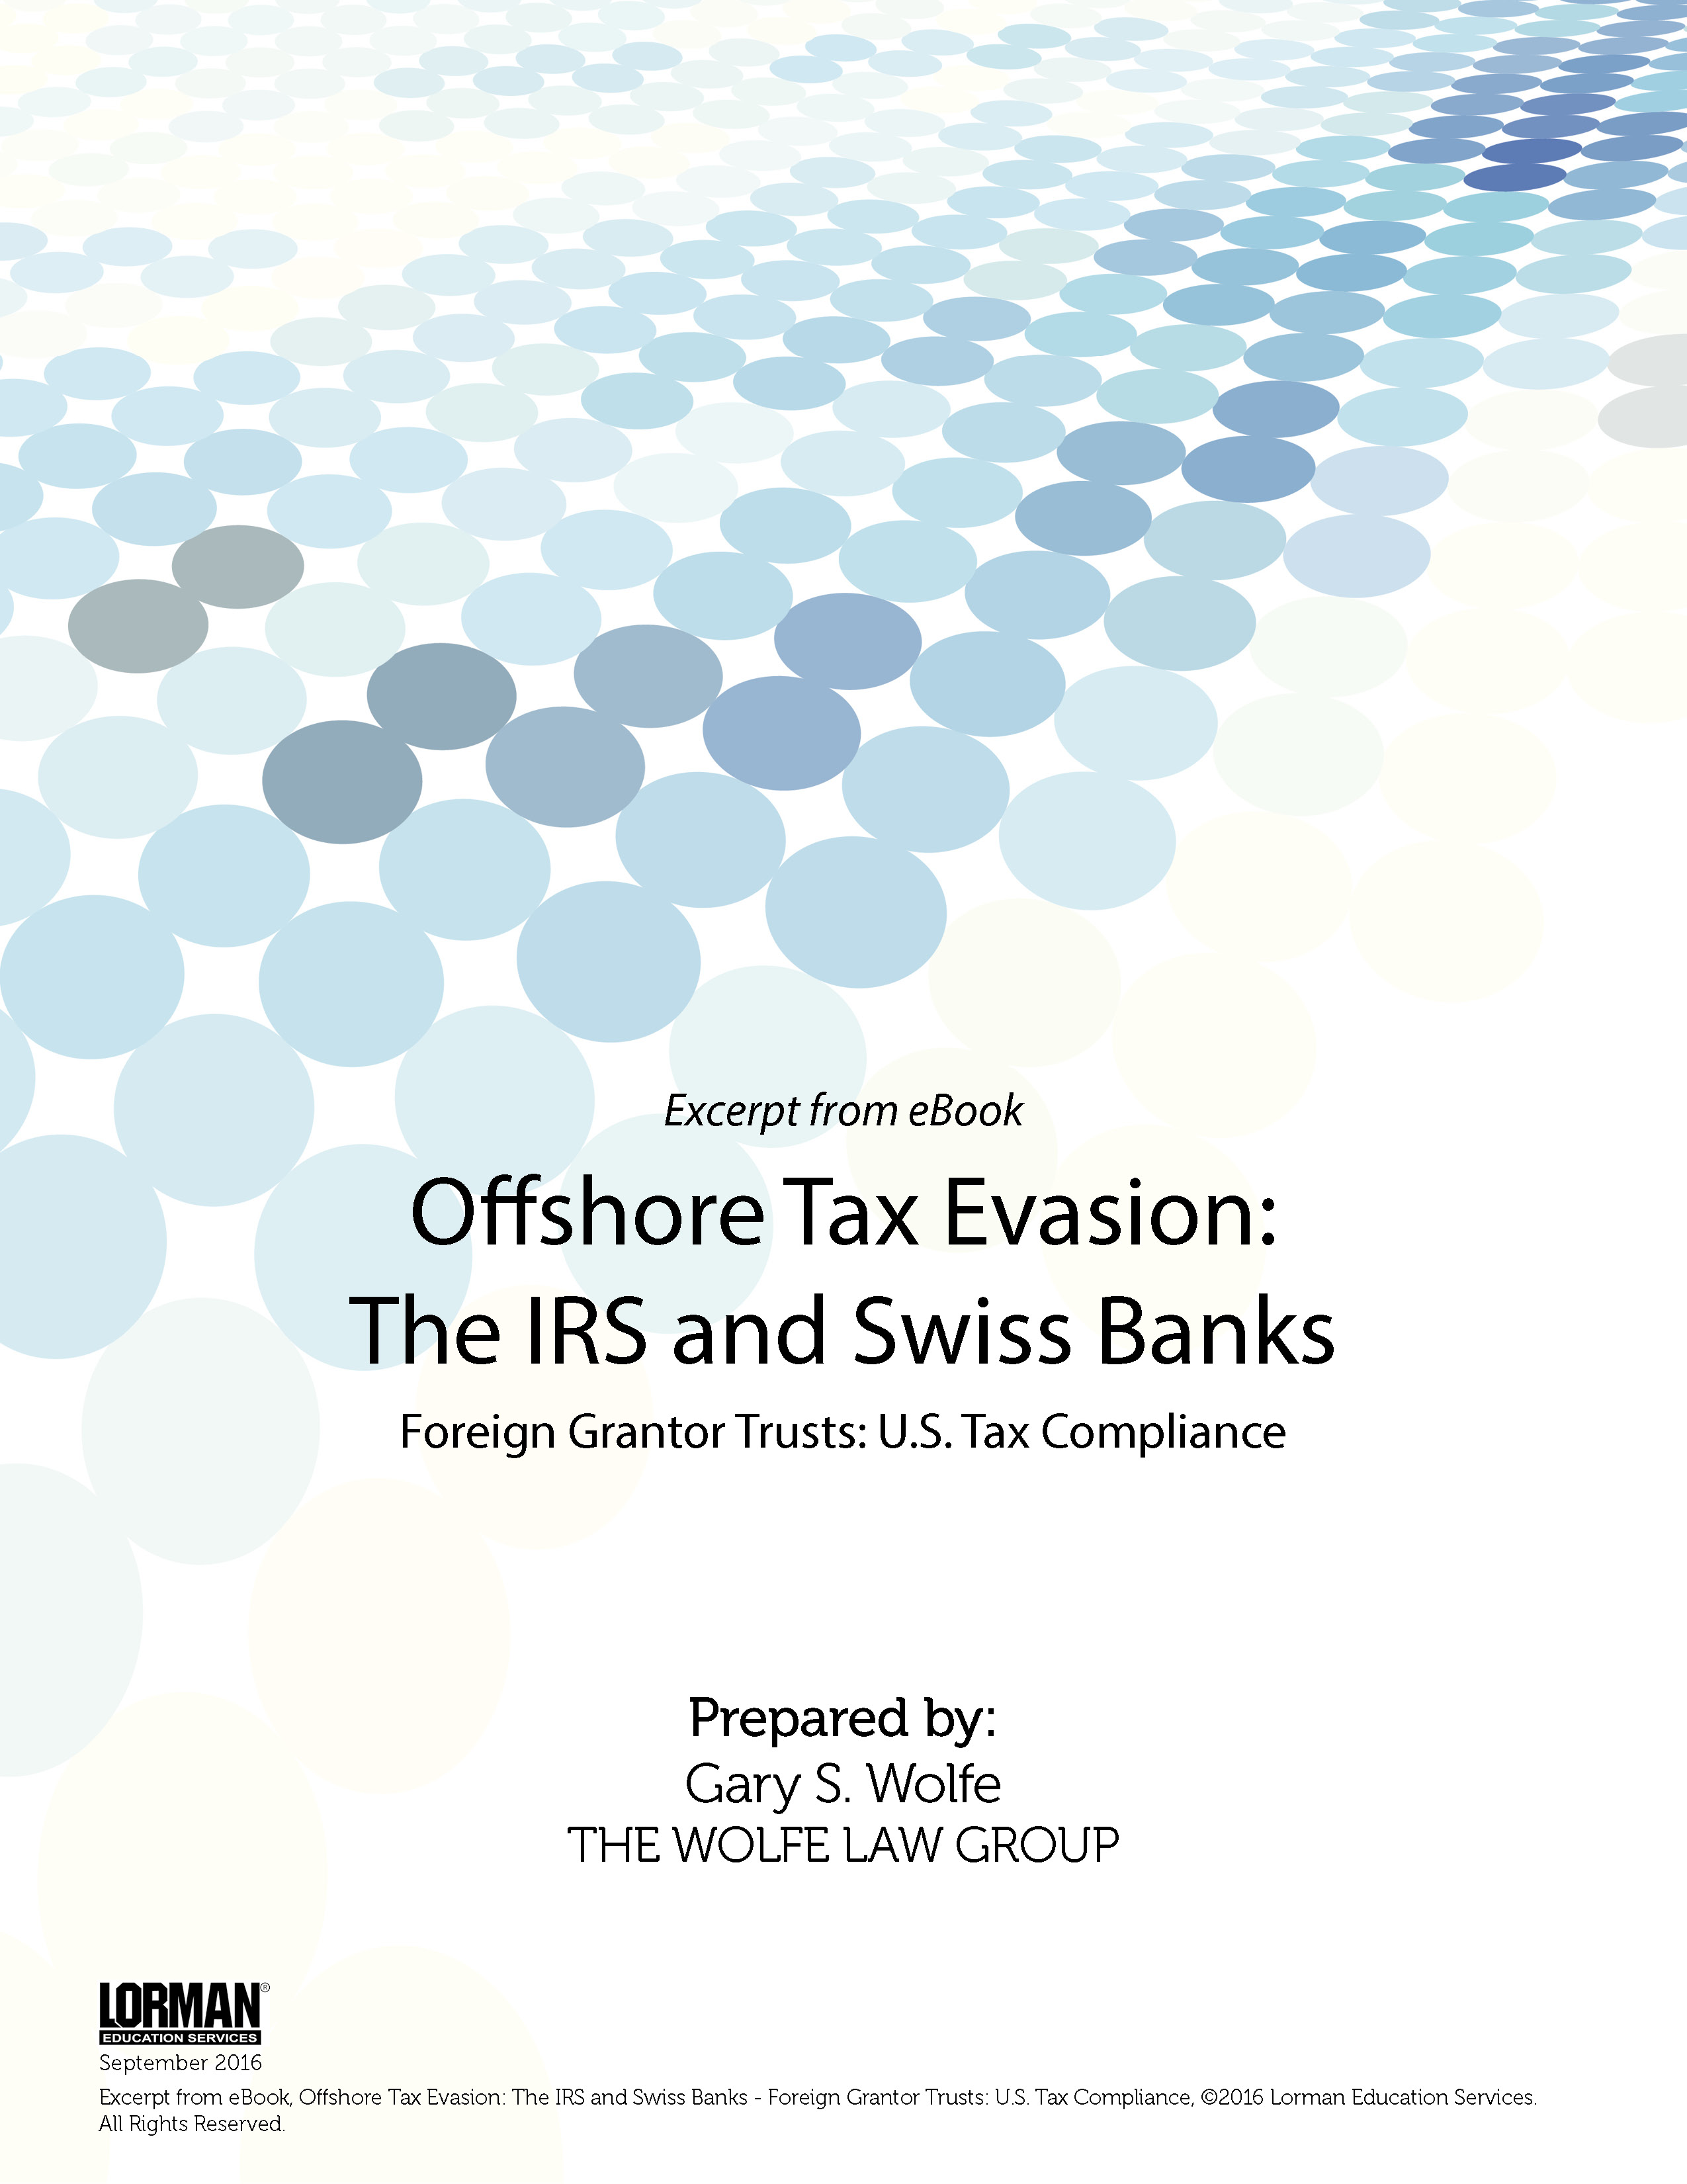 Offshore Tax Evasion: The IRS and Swiss Banks - Foreign Grantor Trusts: U.S. Tax Compliance